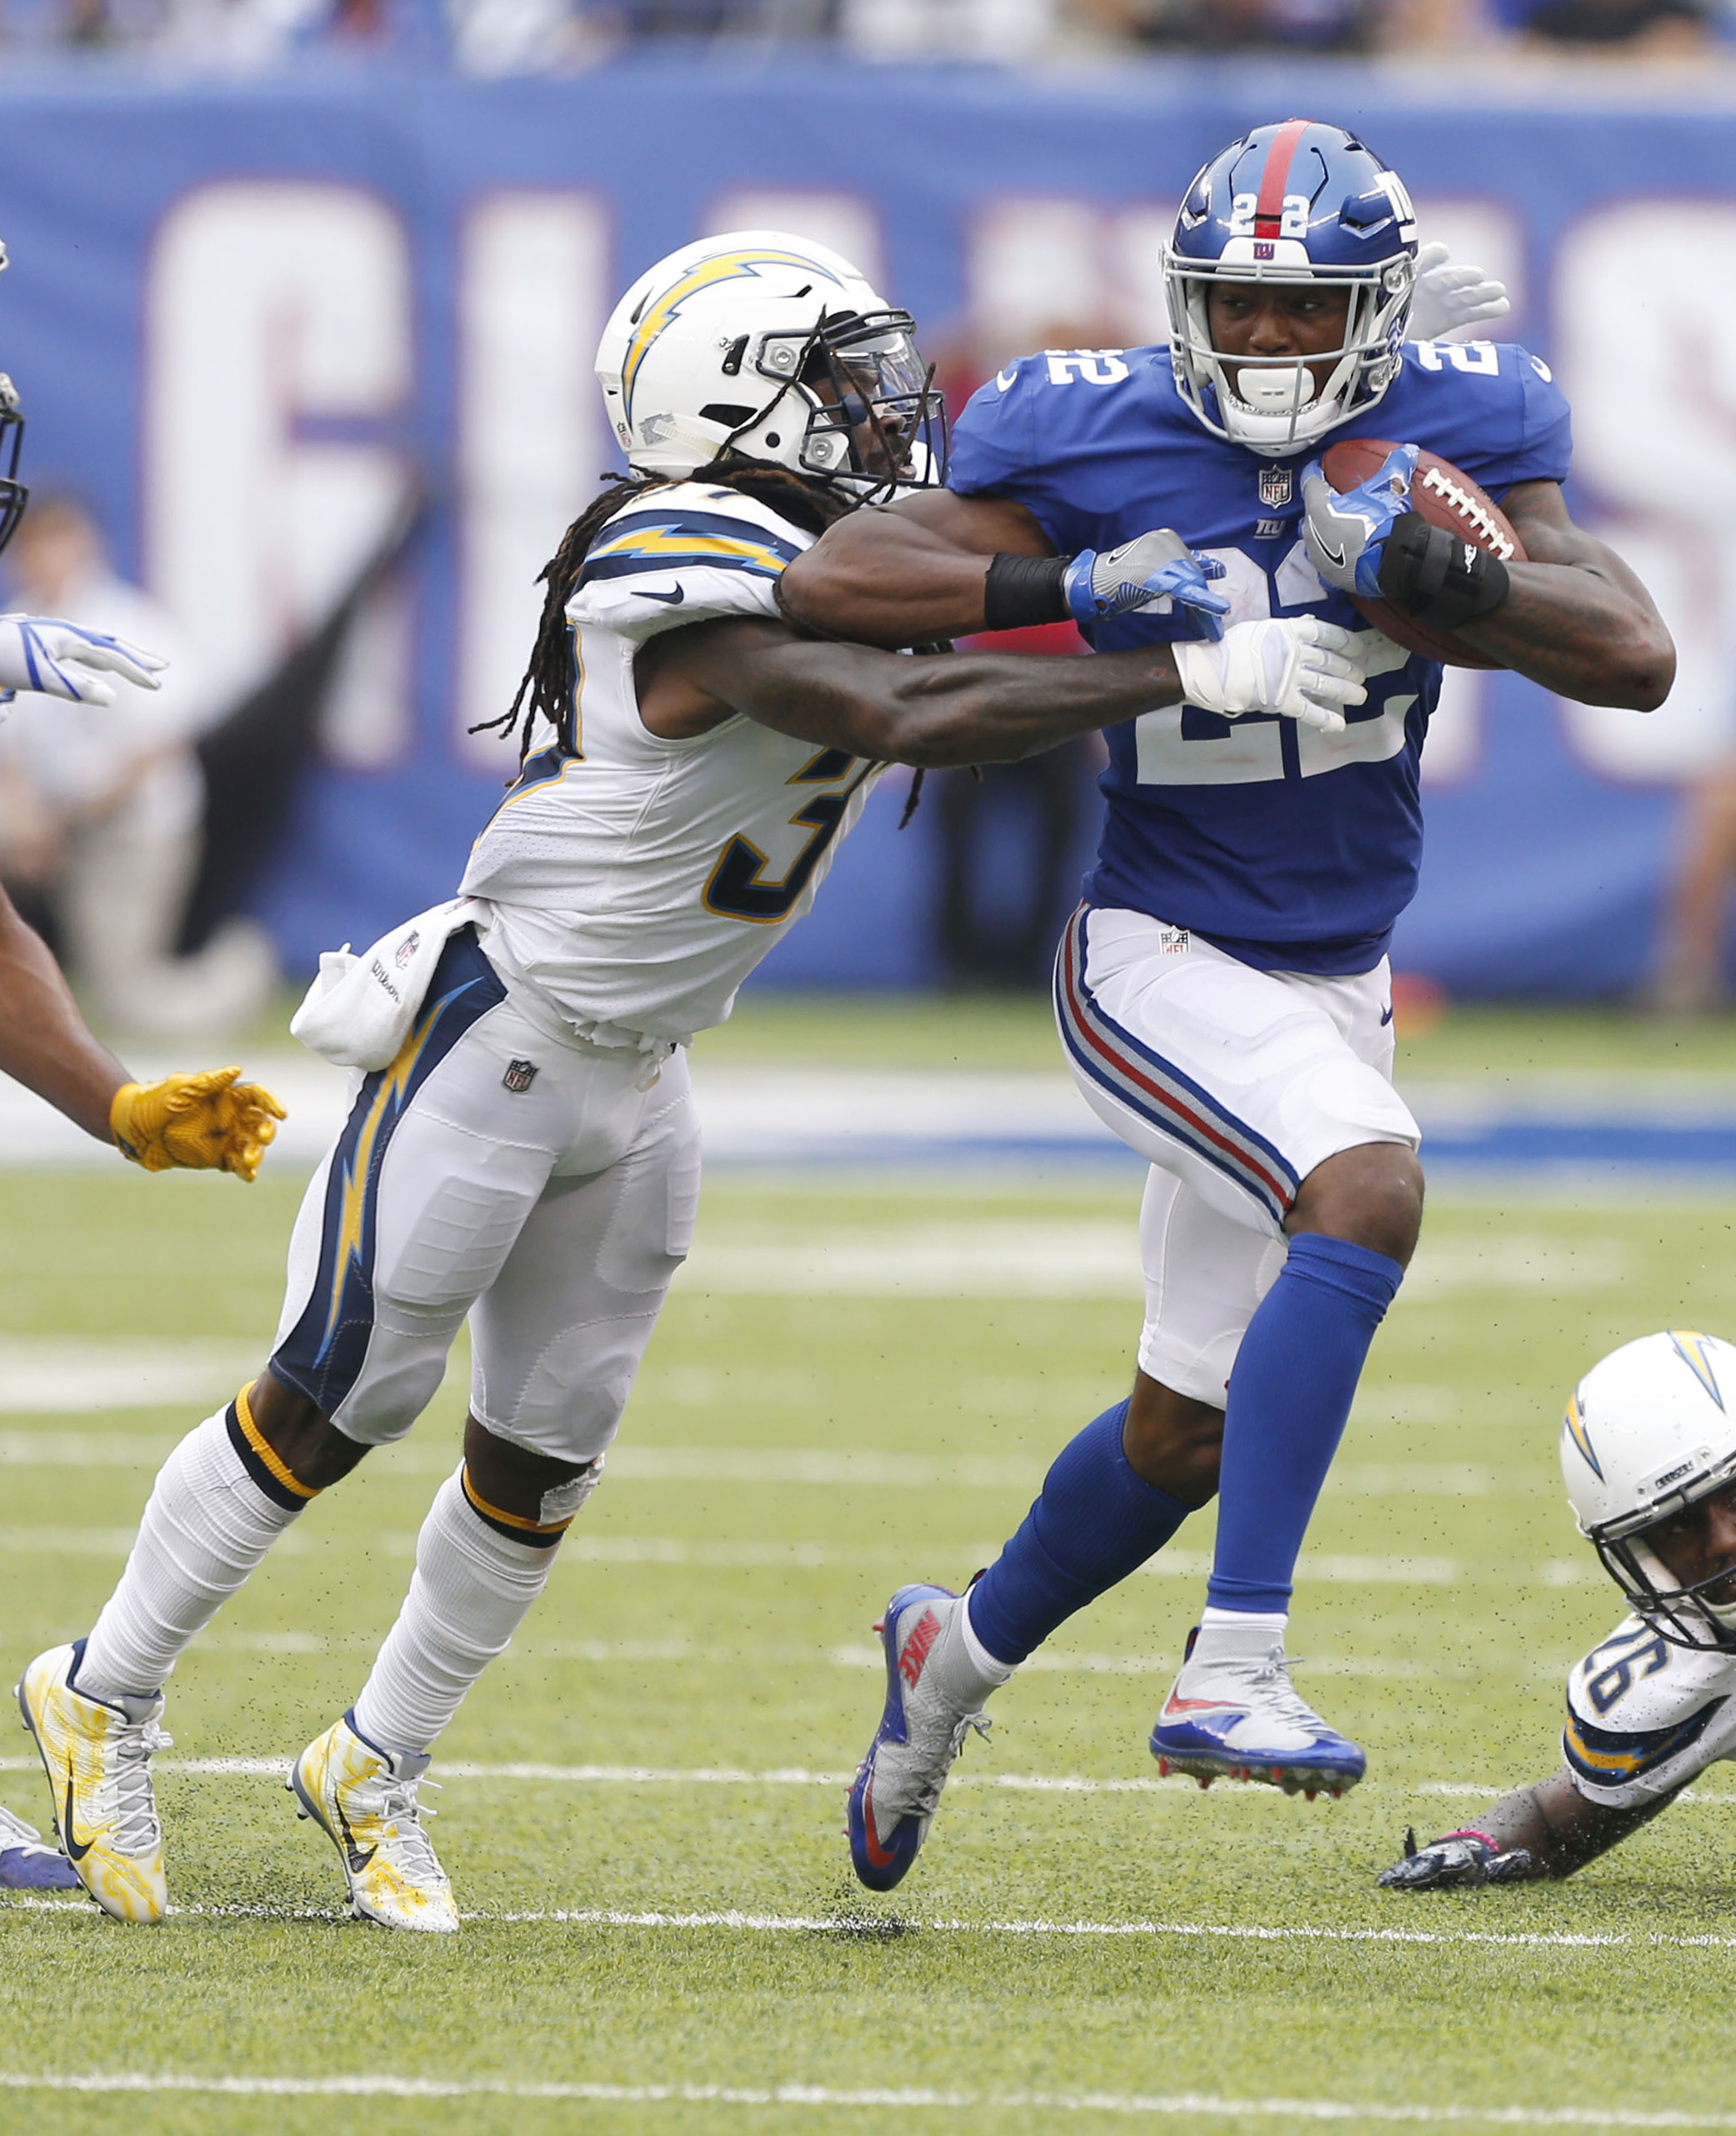 NFL: Los Angeles Chargers at New York Giants